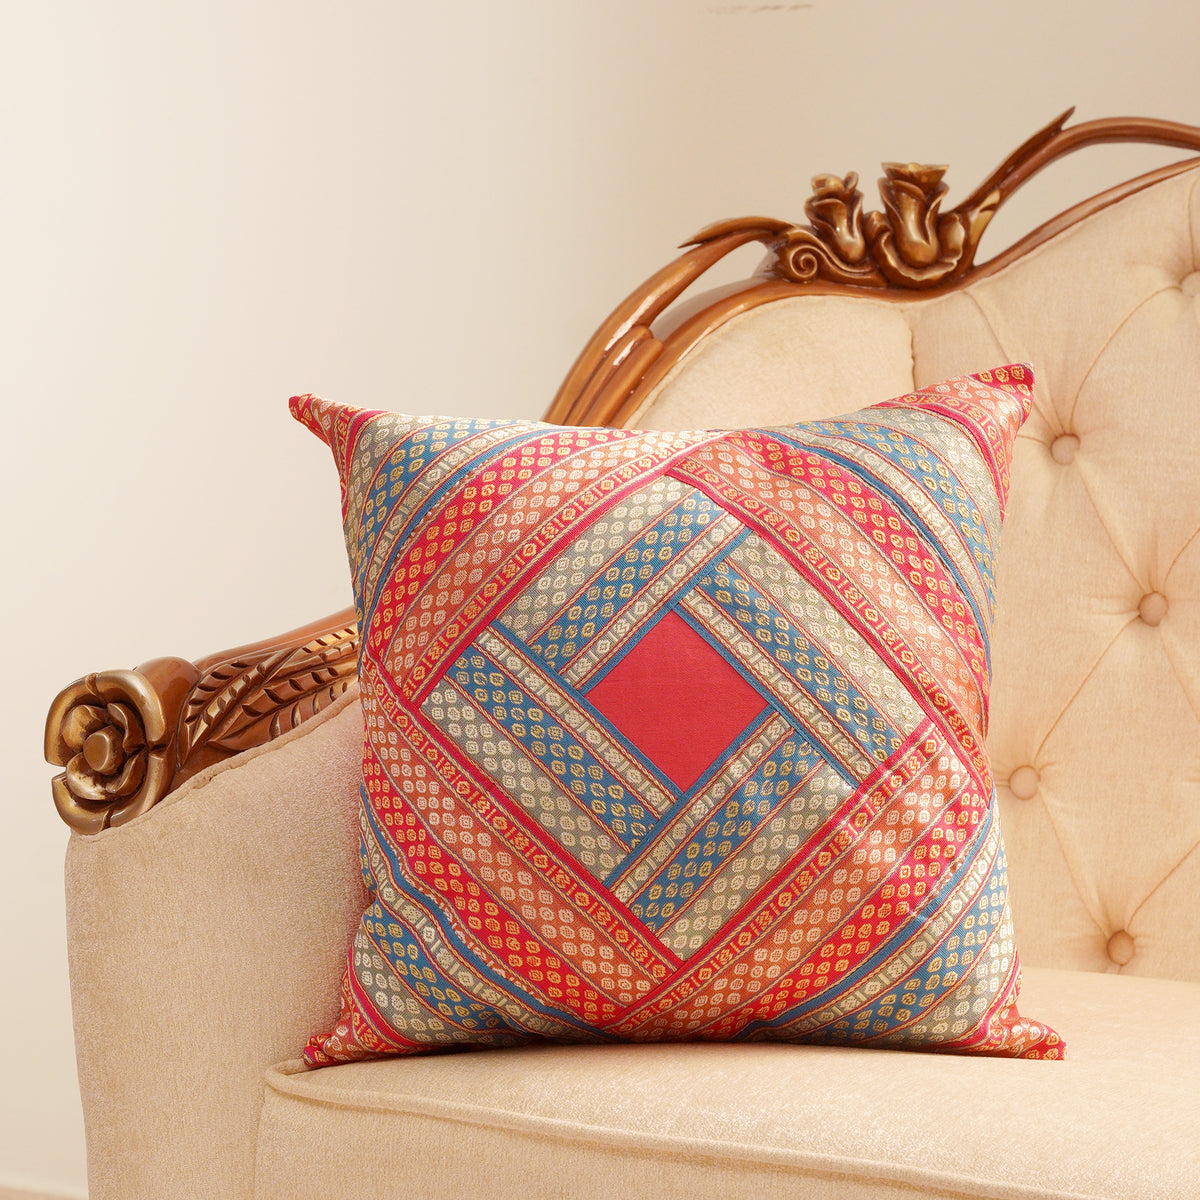 Cushion Cover - Pink